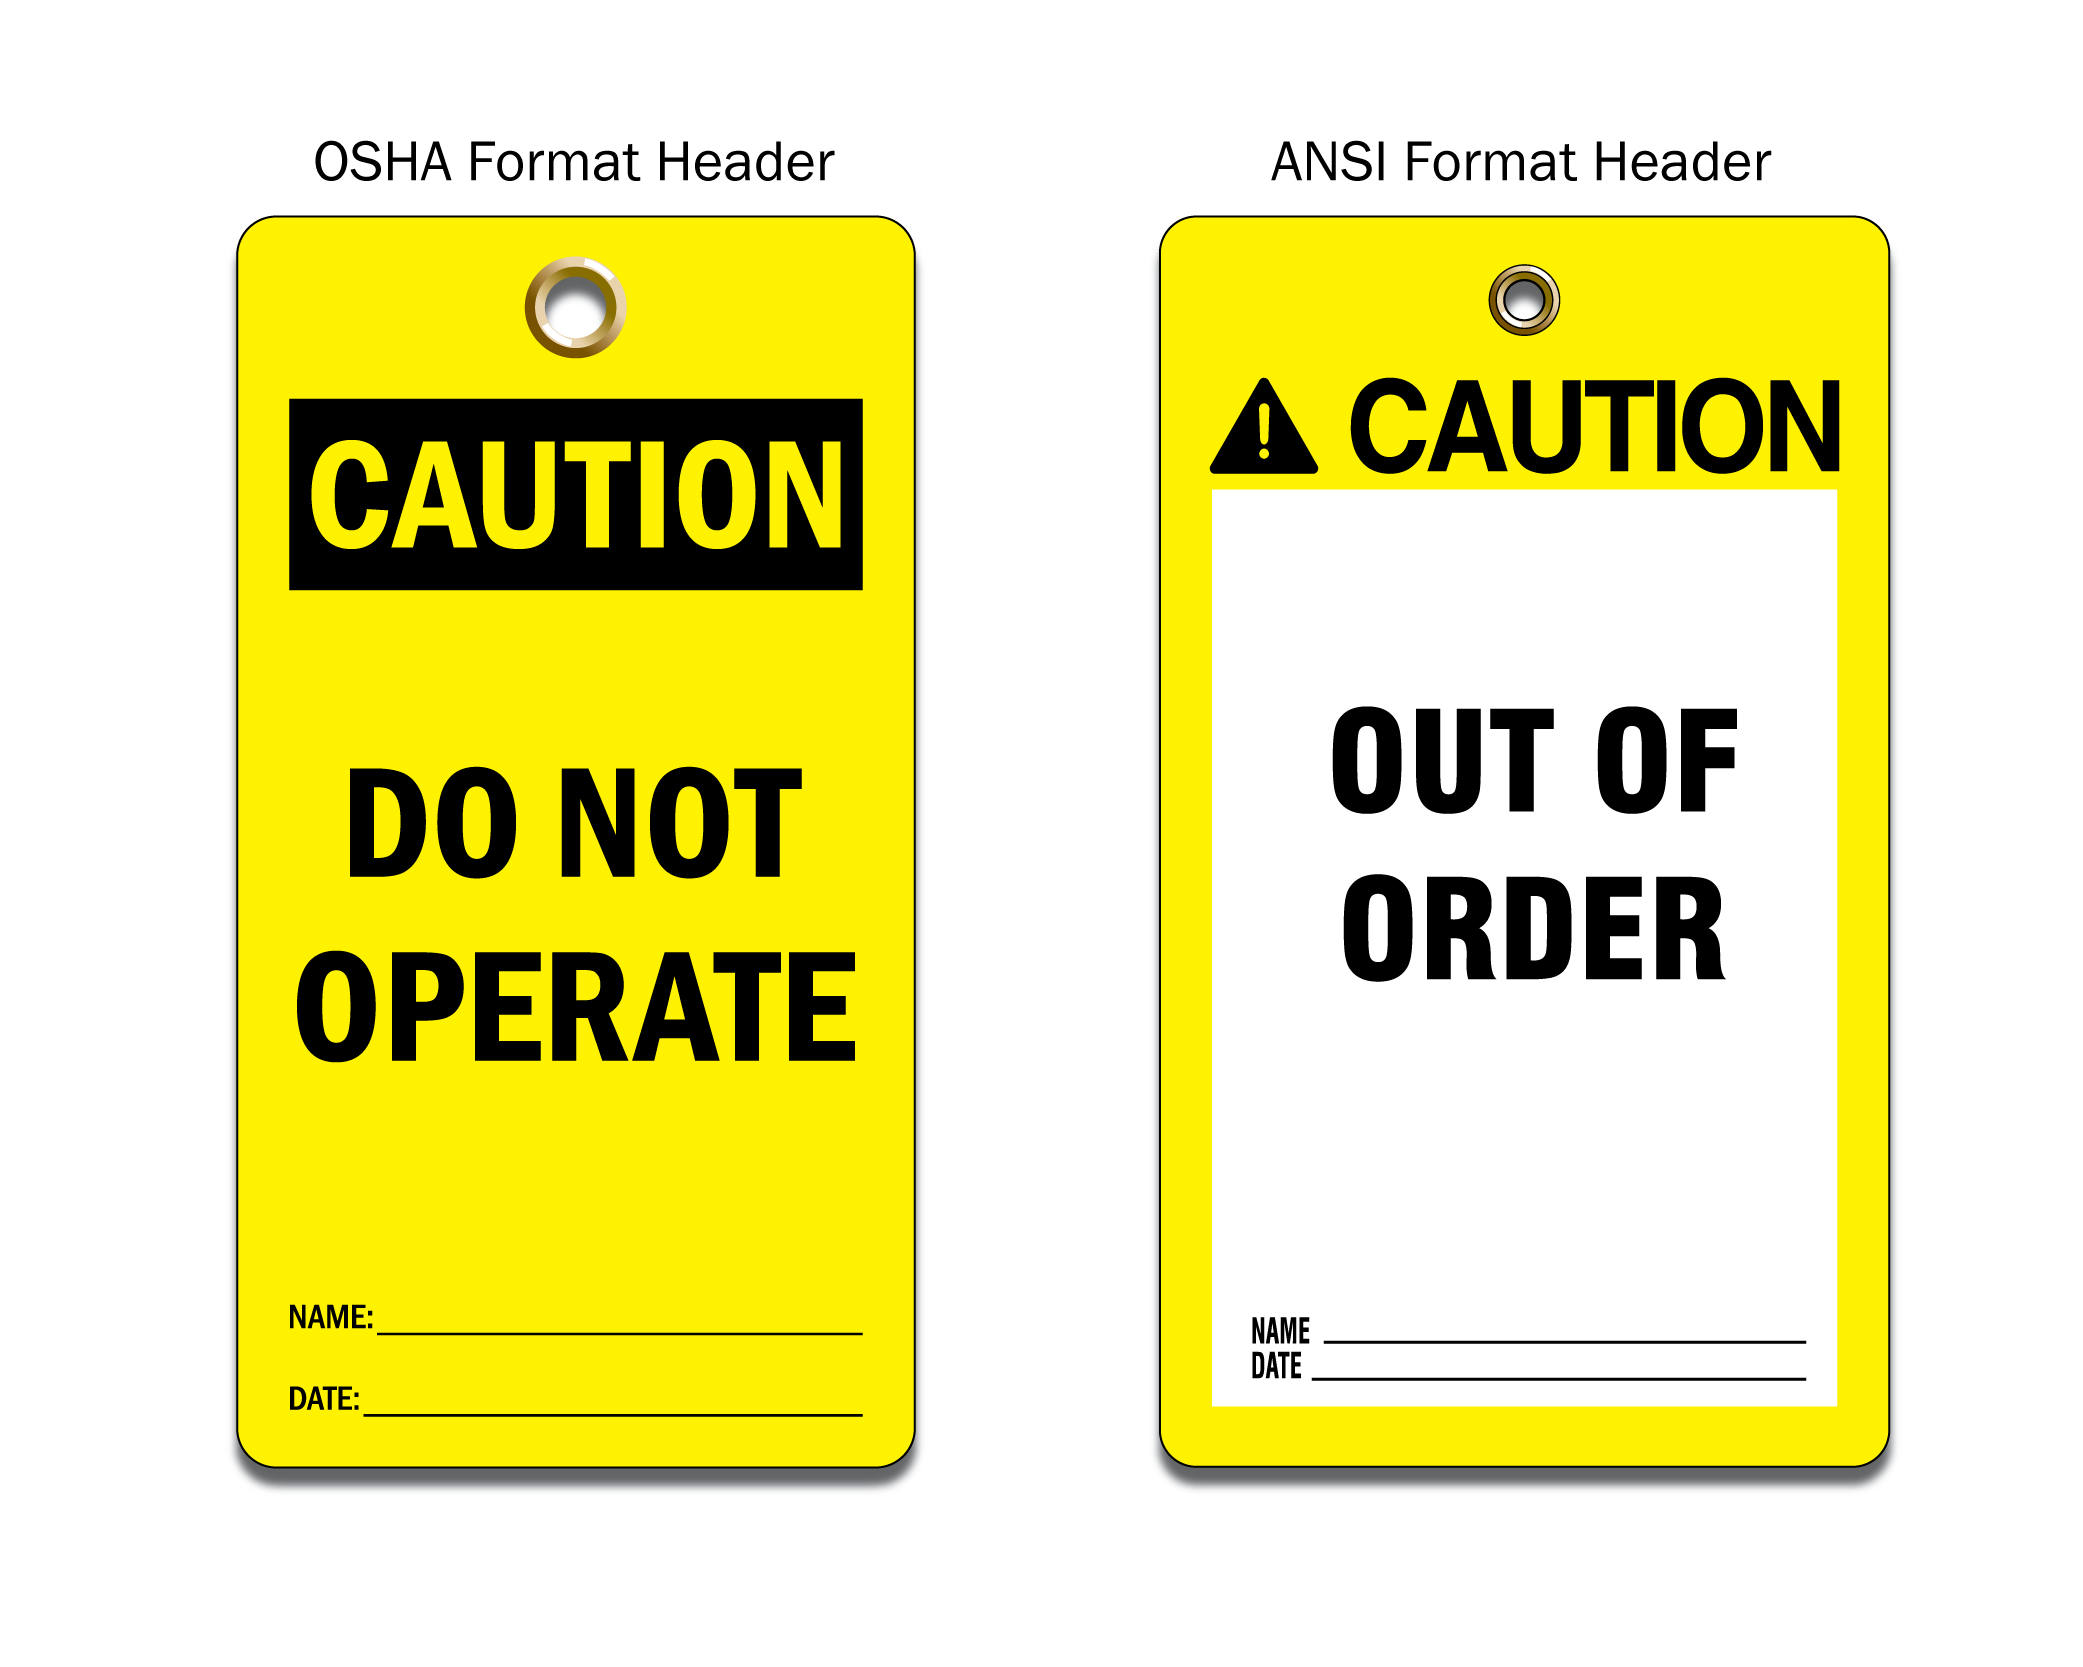 An image of two rectangular yellow caution tags with black text. One tag is OSHA format and the other is ANSI format.